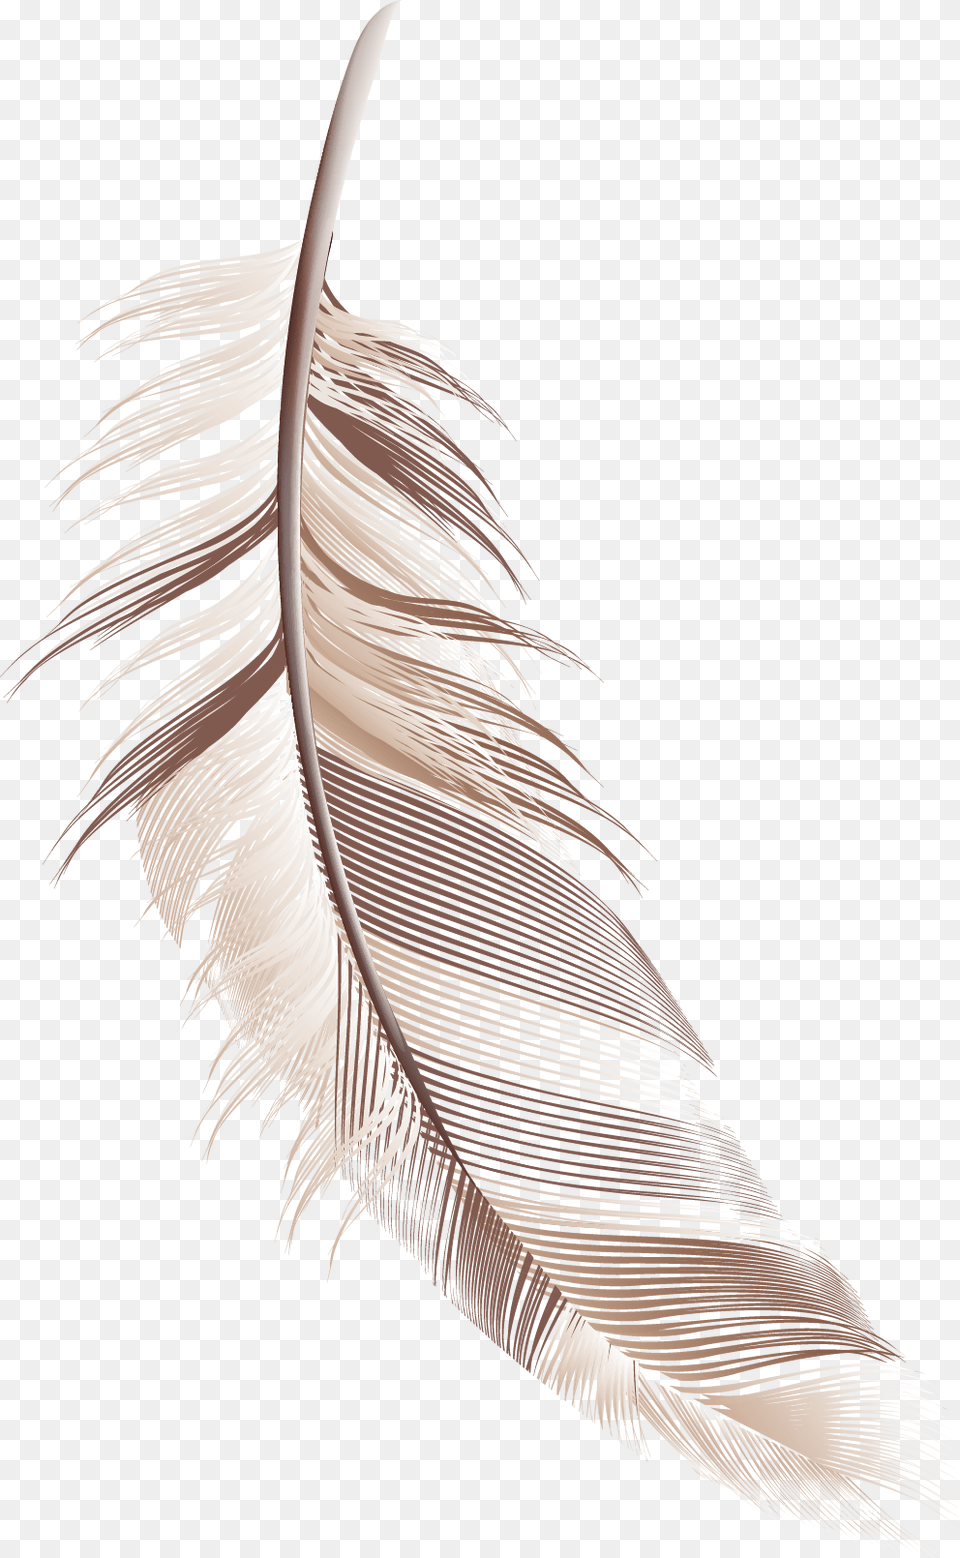 Cartoon Feather Material Download Cartoon Of Feather, Bottle, Art Free Transparent Png